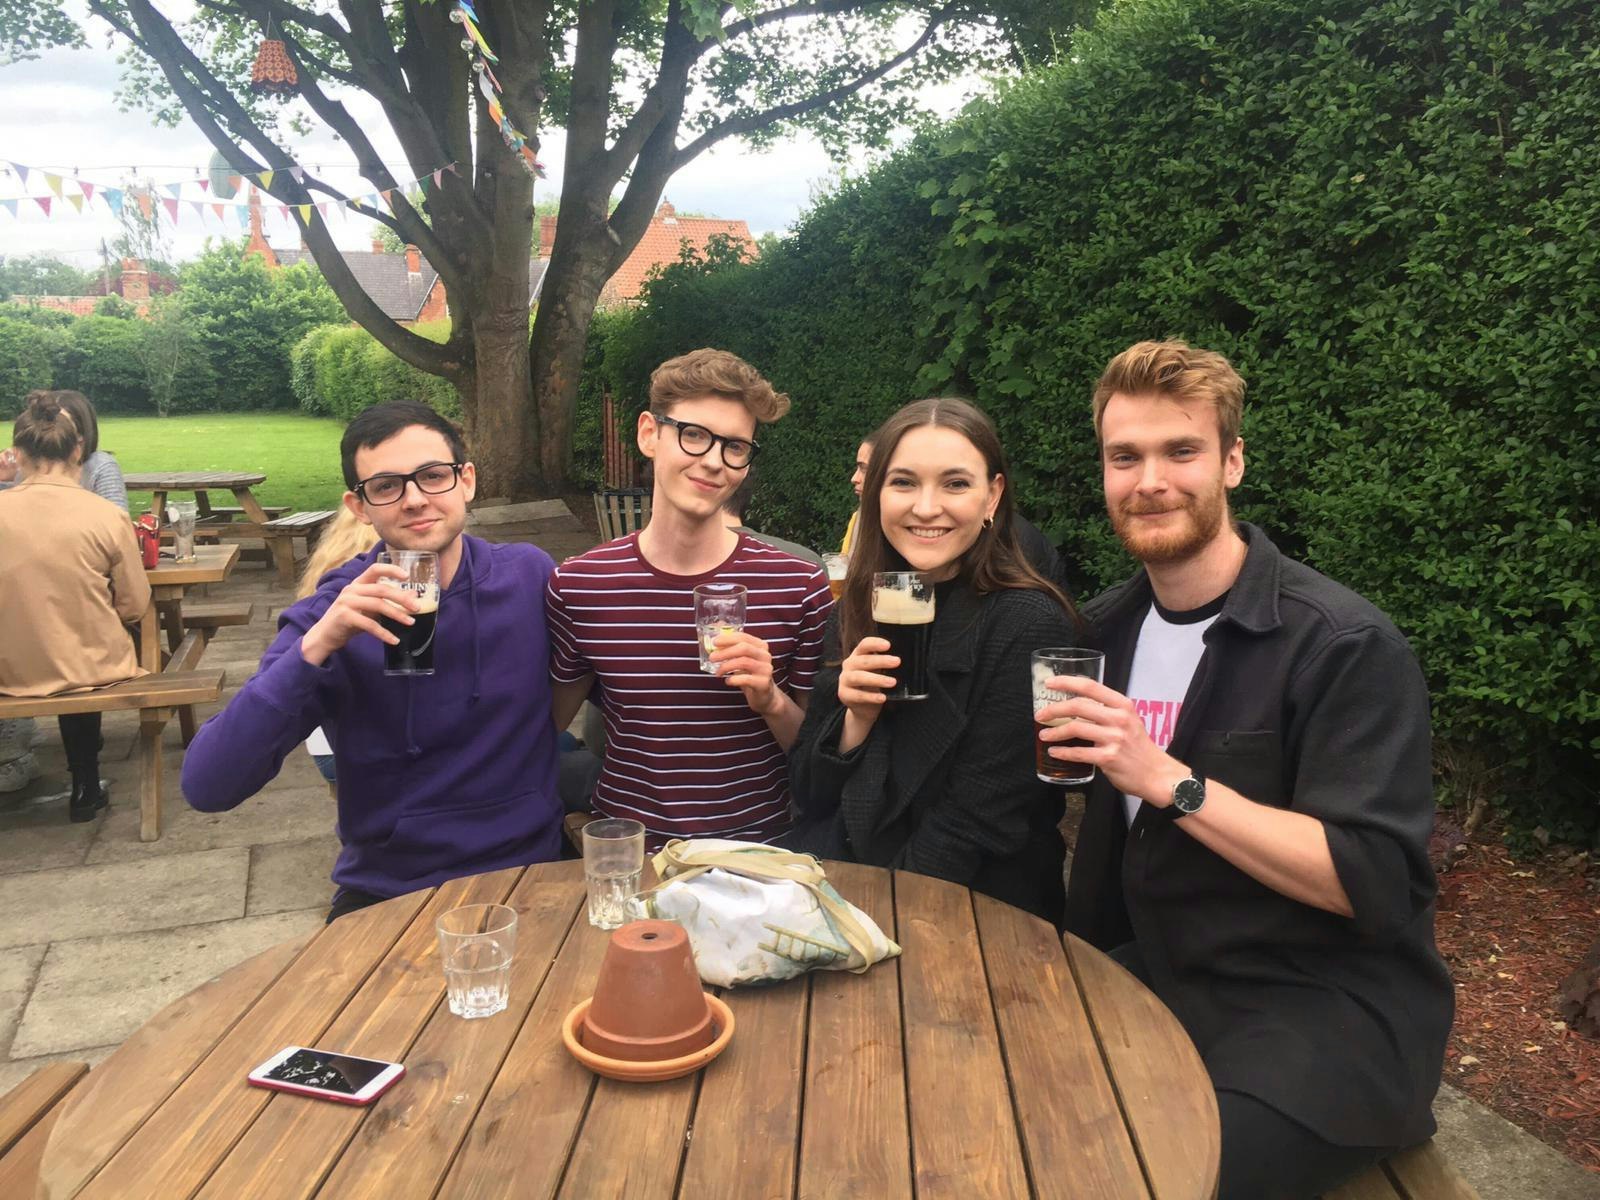 Alex and three friends sit at a round pub table outdoors